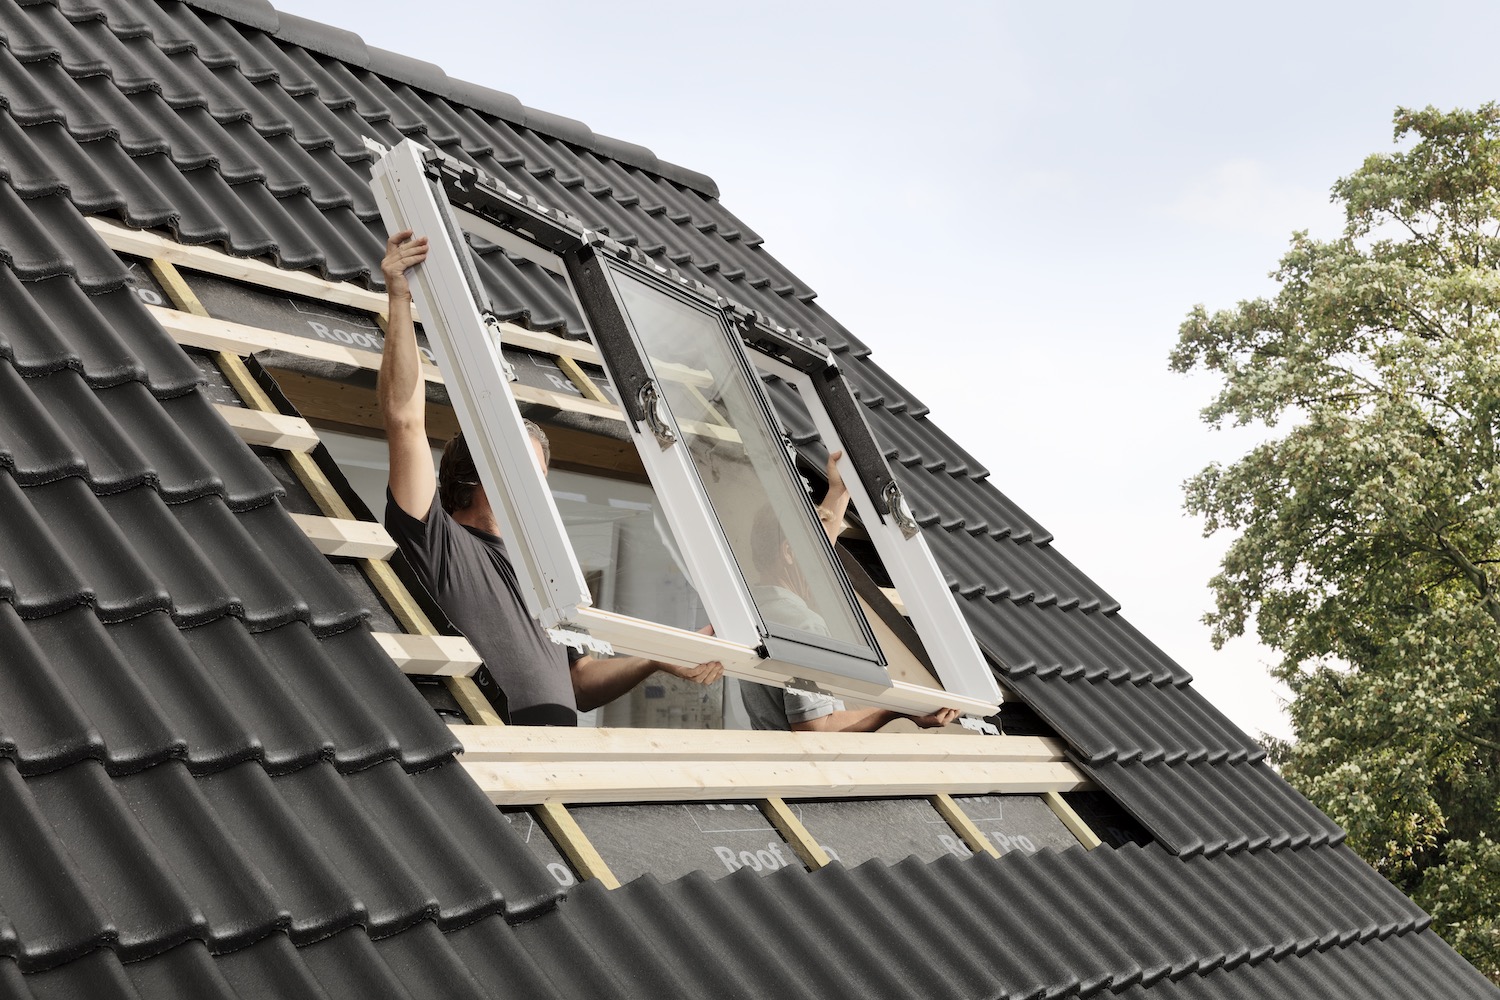 VELUX roof windows being installed in a loft conversion exterior roof image